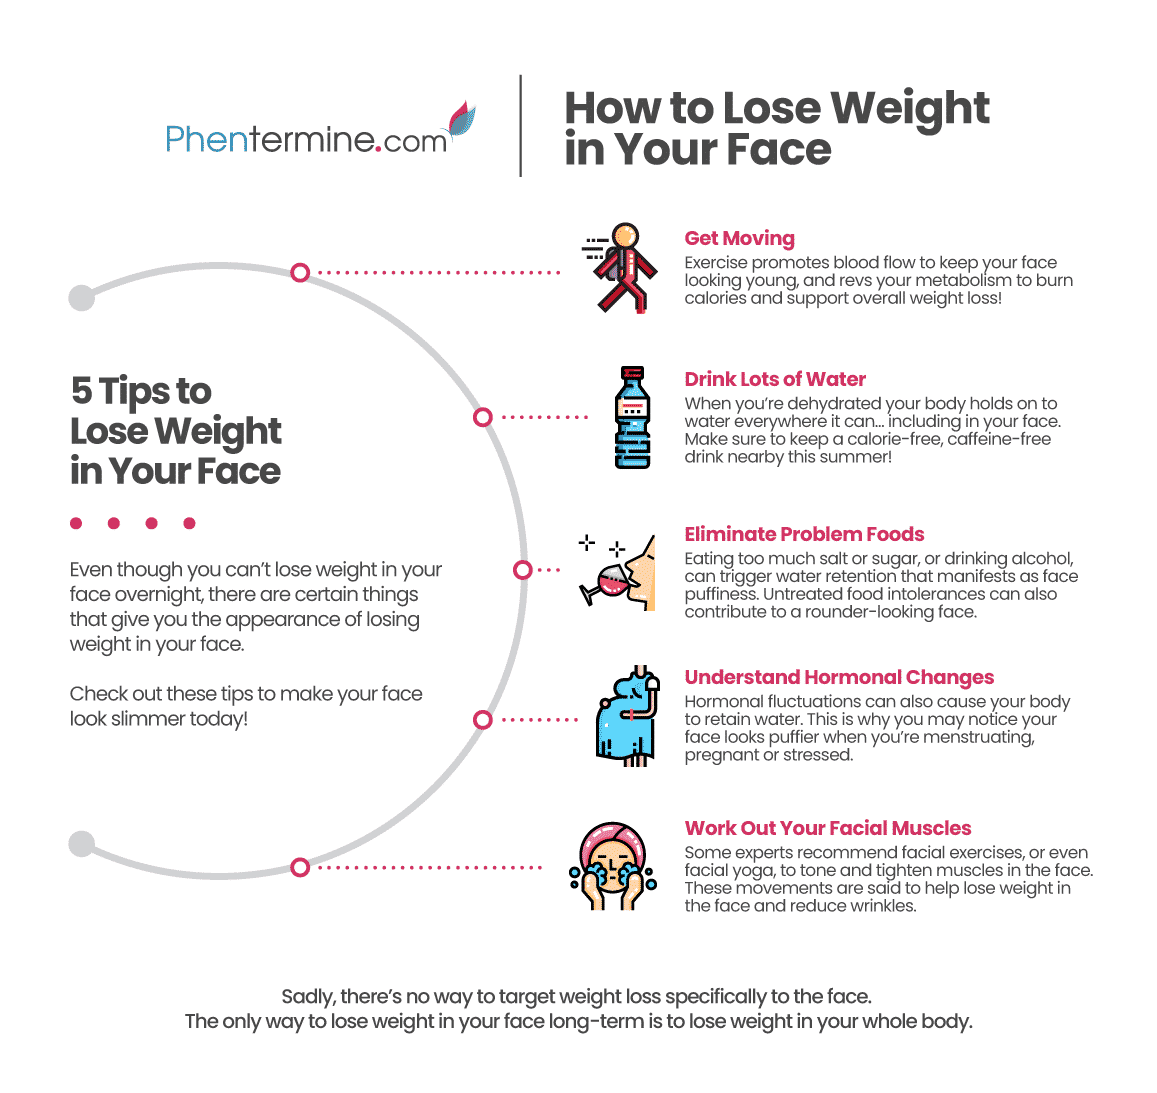 How to Lose Weight in Your Face Infographic